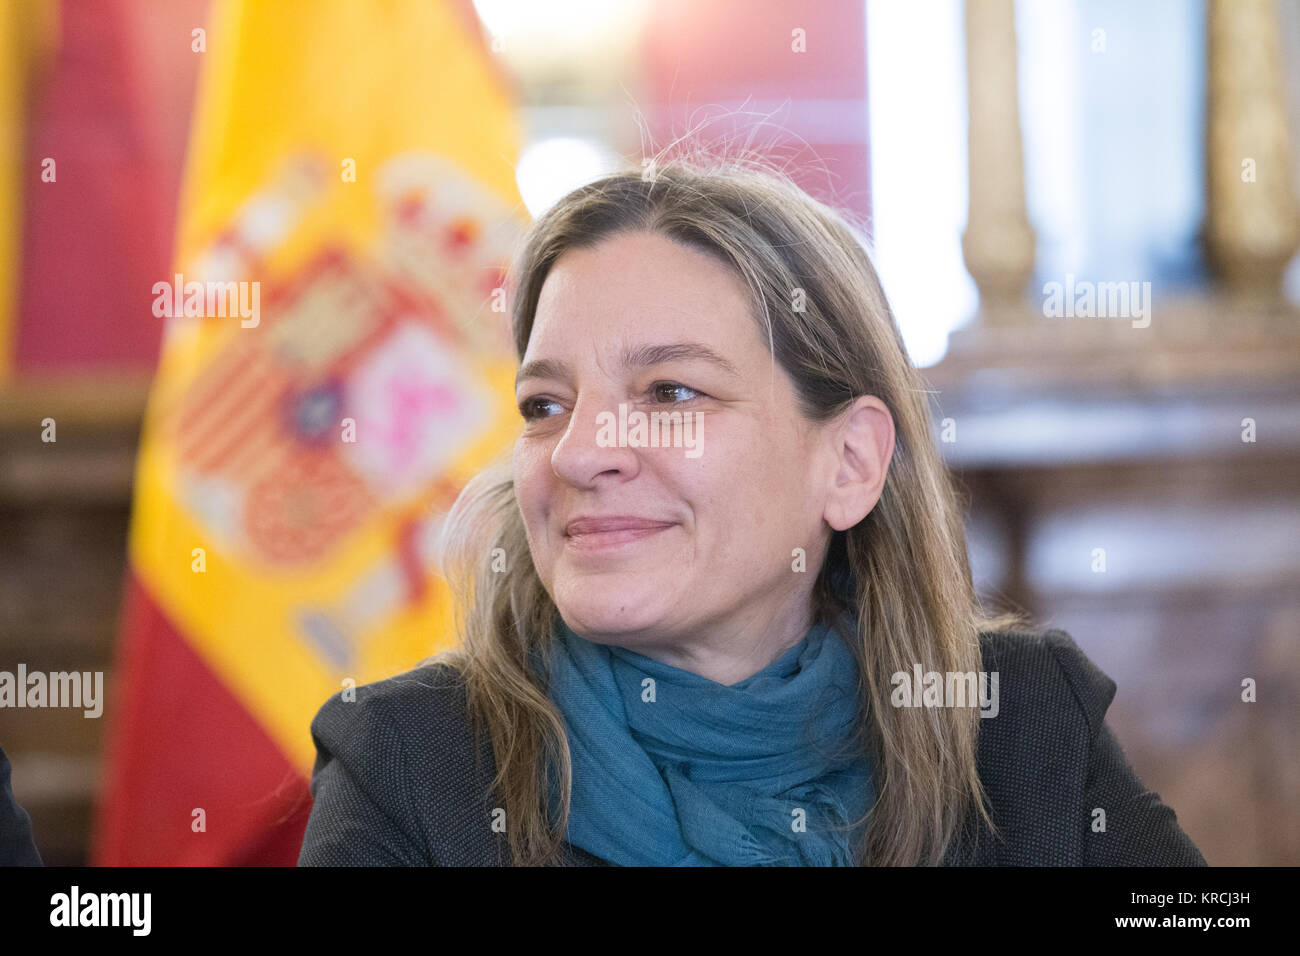 Roma, Italy. 19th Dec, 2017. Ana Maria Salomon Perez, Minister Counselor of  the Spanish Embassy in Italy, during press conference Credit: Matteo  Nardone/Pacific Press/Alamy Live News Stock Photo - Alamy